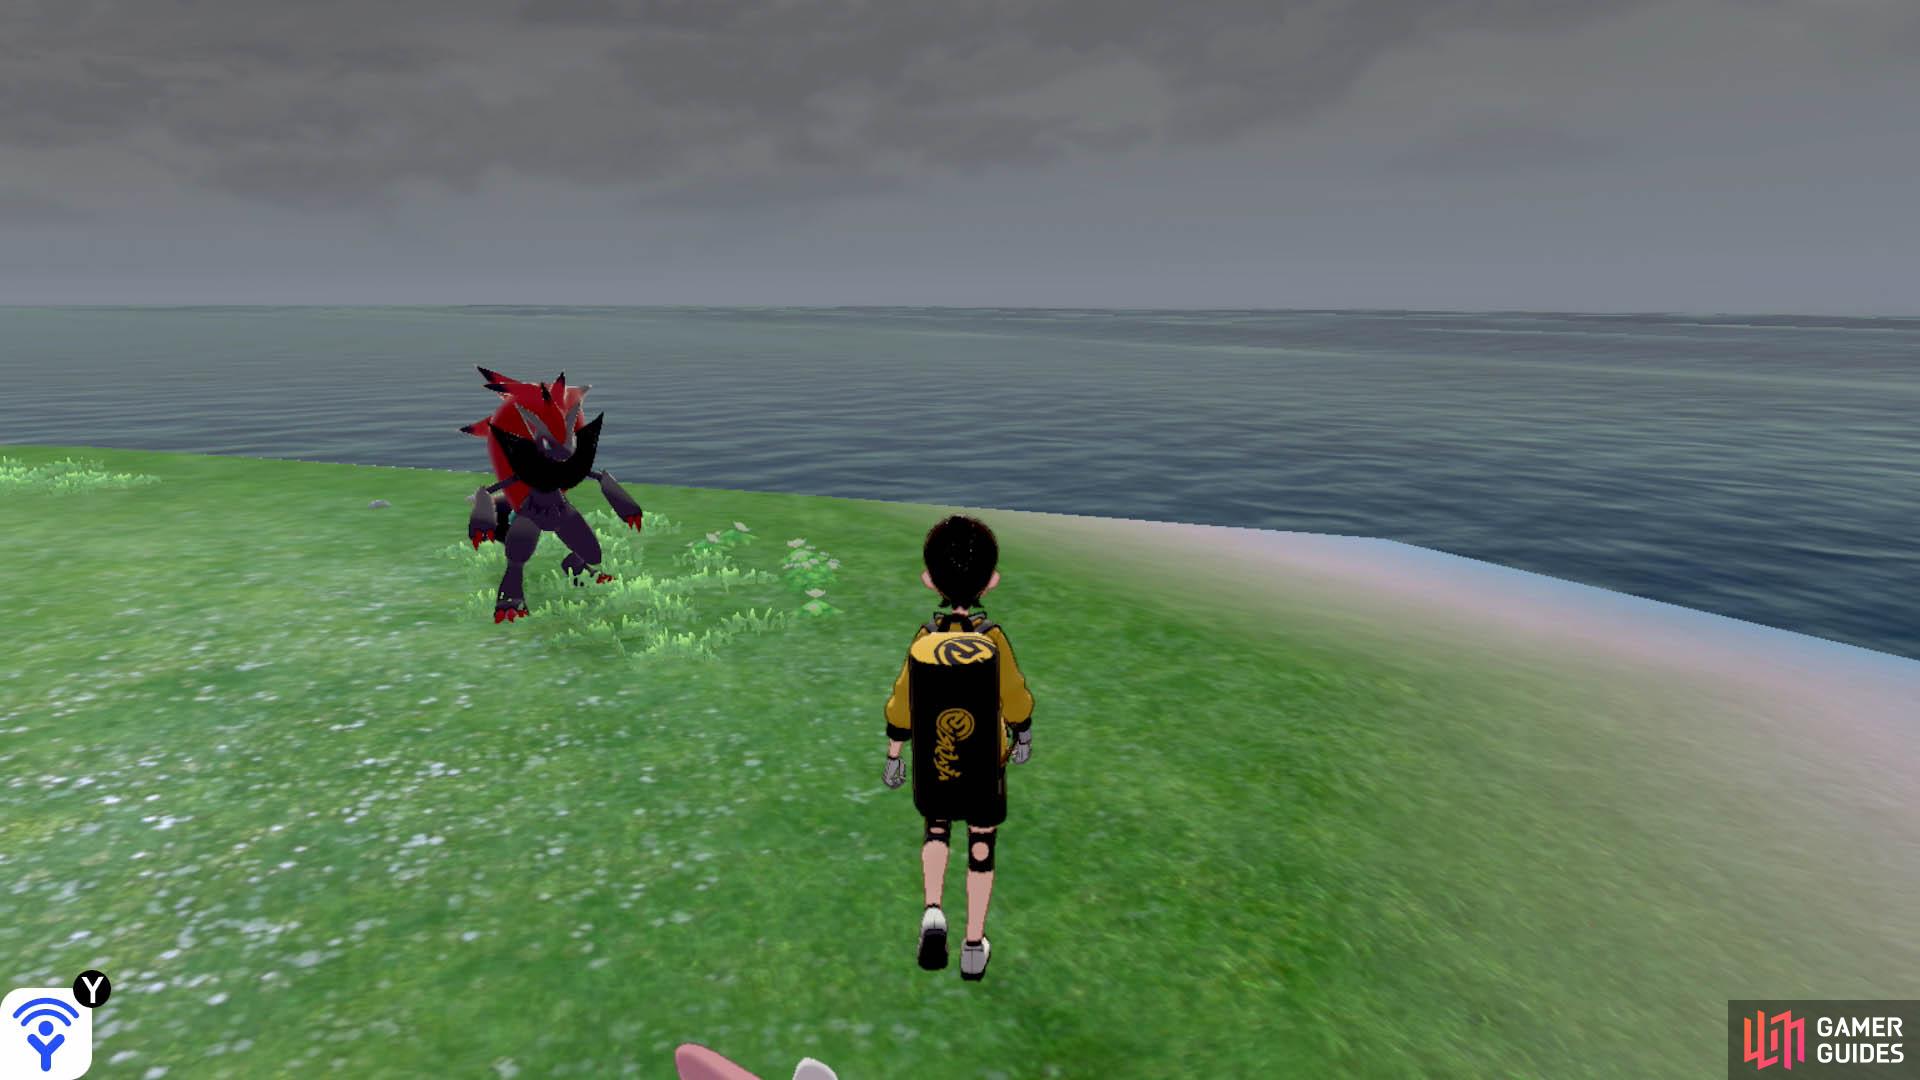 When the weather’s cloudy, you can find Zoroark roaming around.